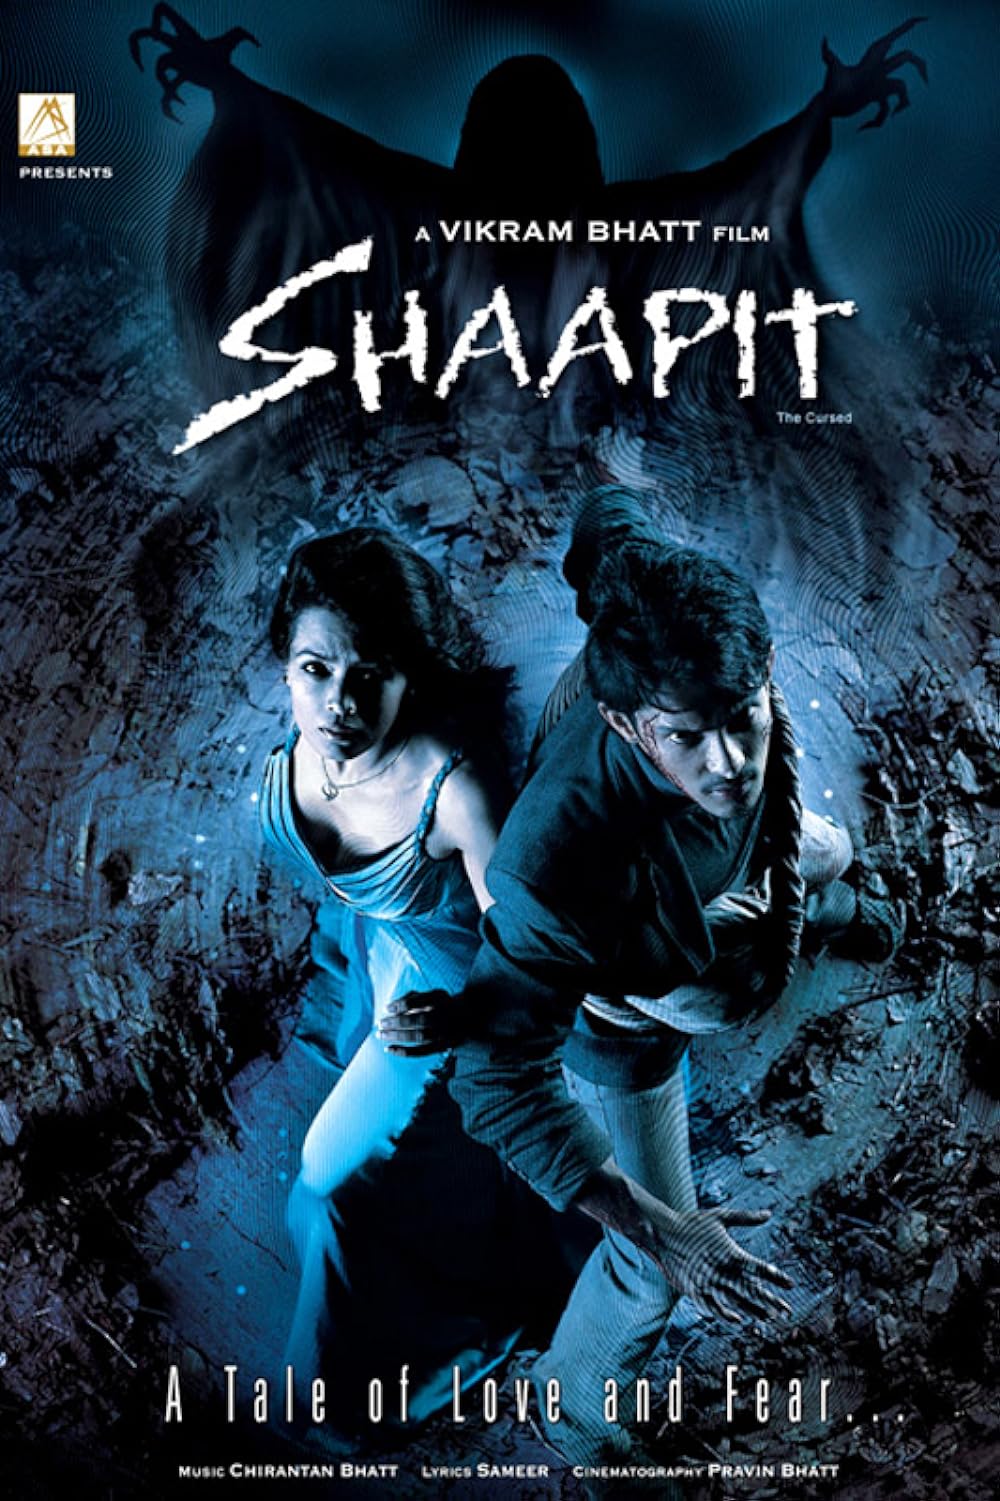 Download Shaapit: The Cursed (2010) Hindi Movie Bluray || 720p [400MB] || 1080p [1.1GB]